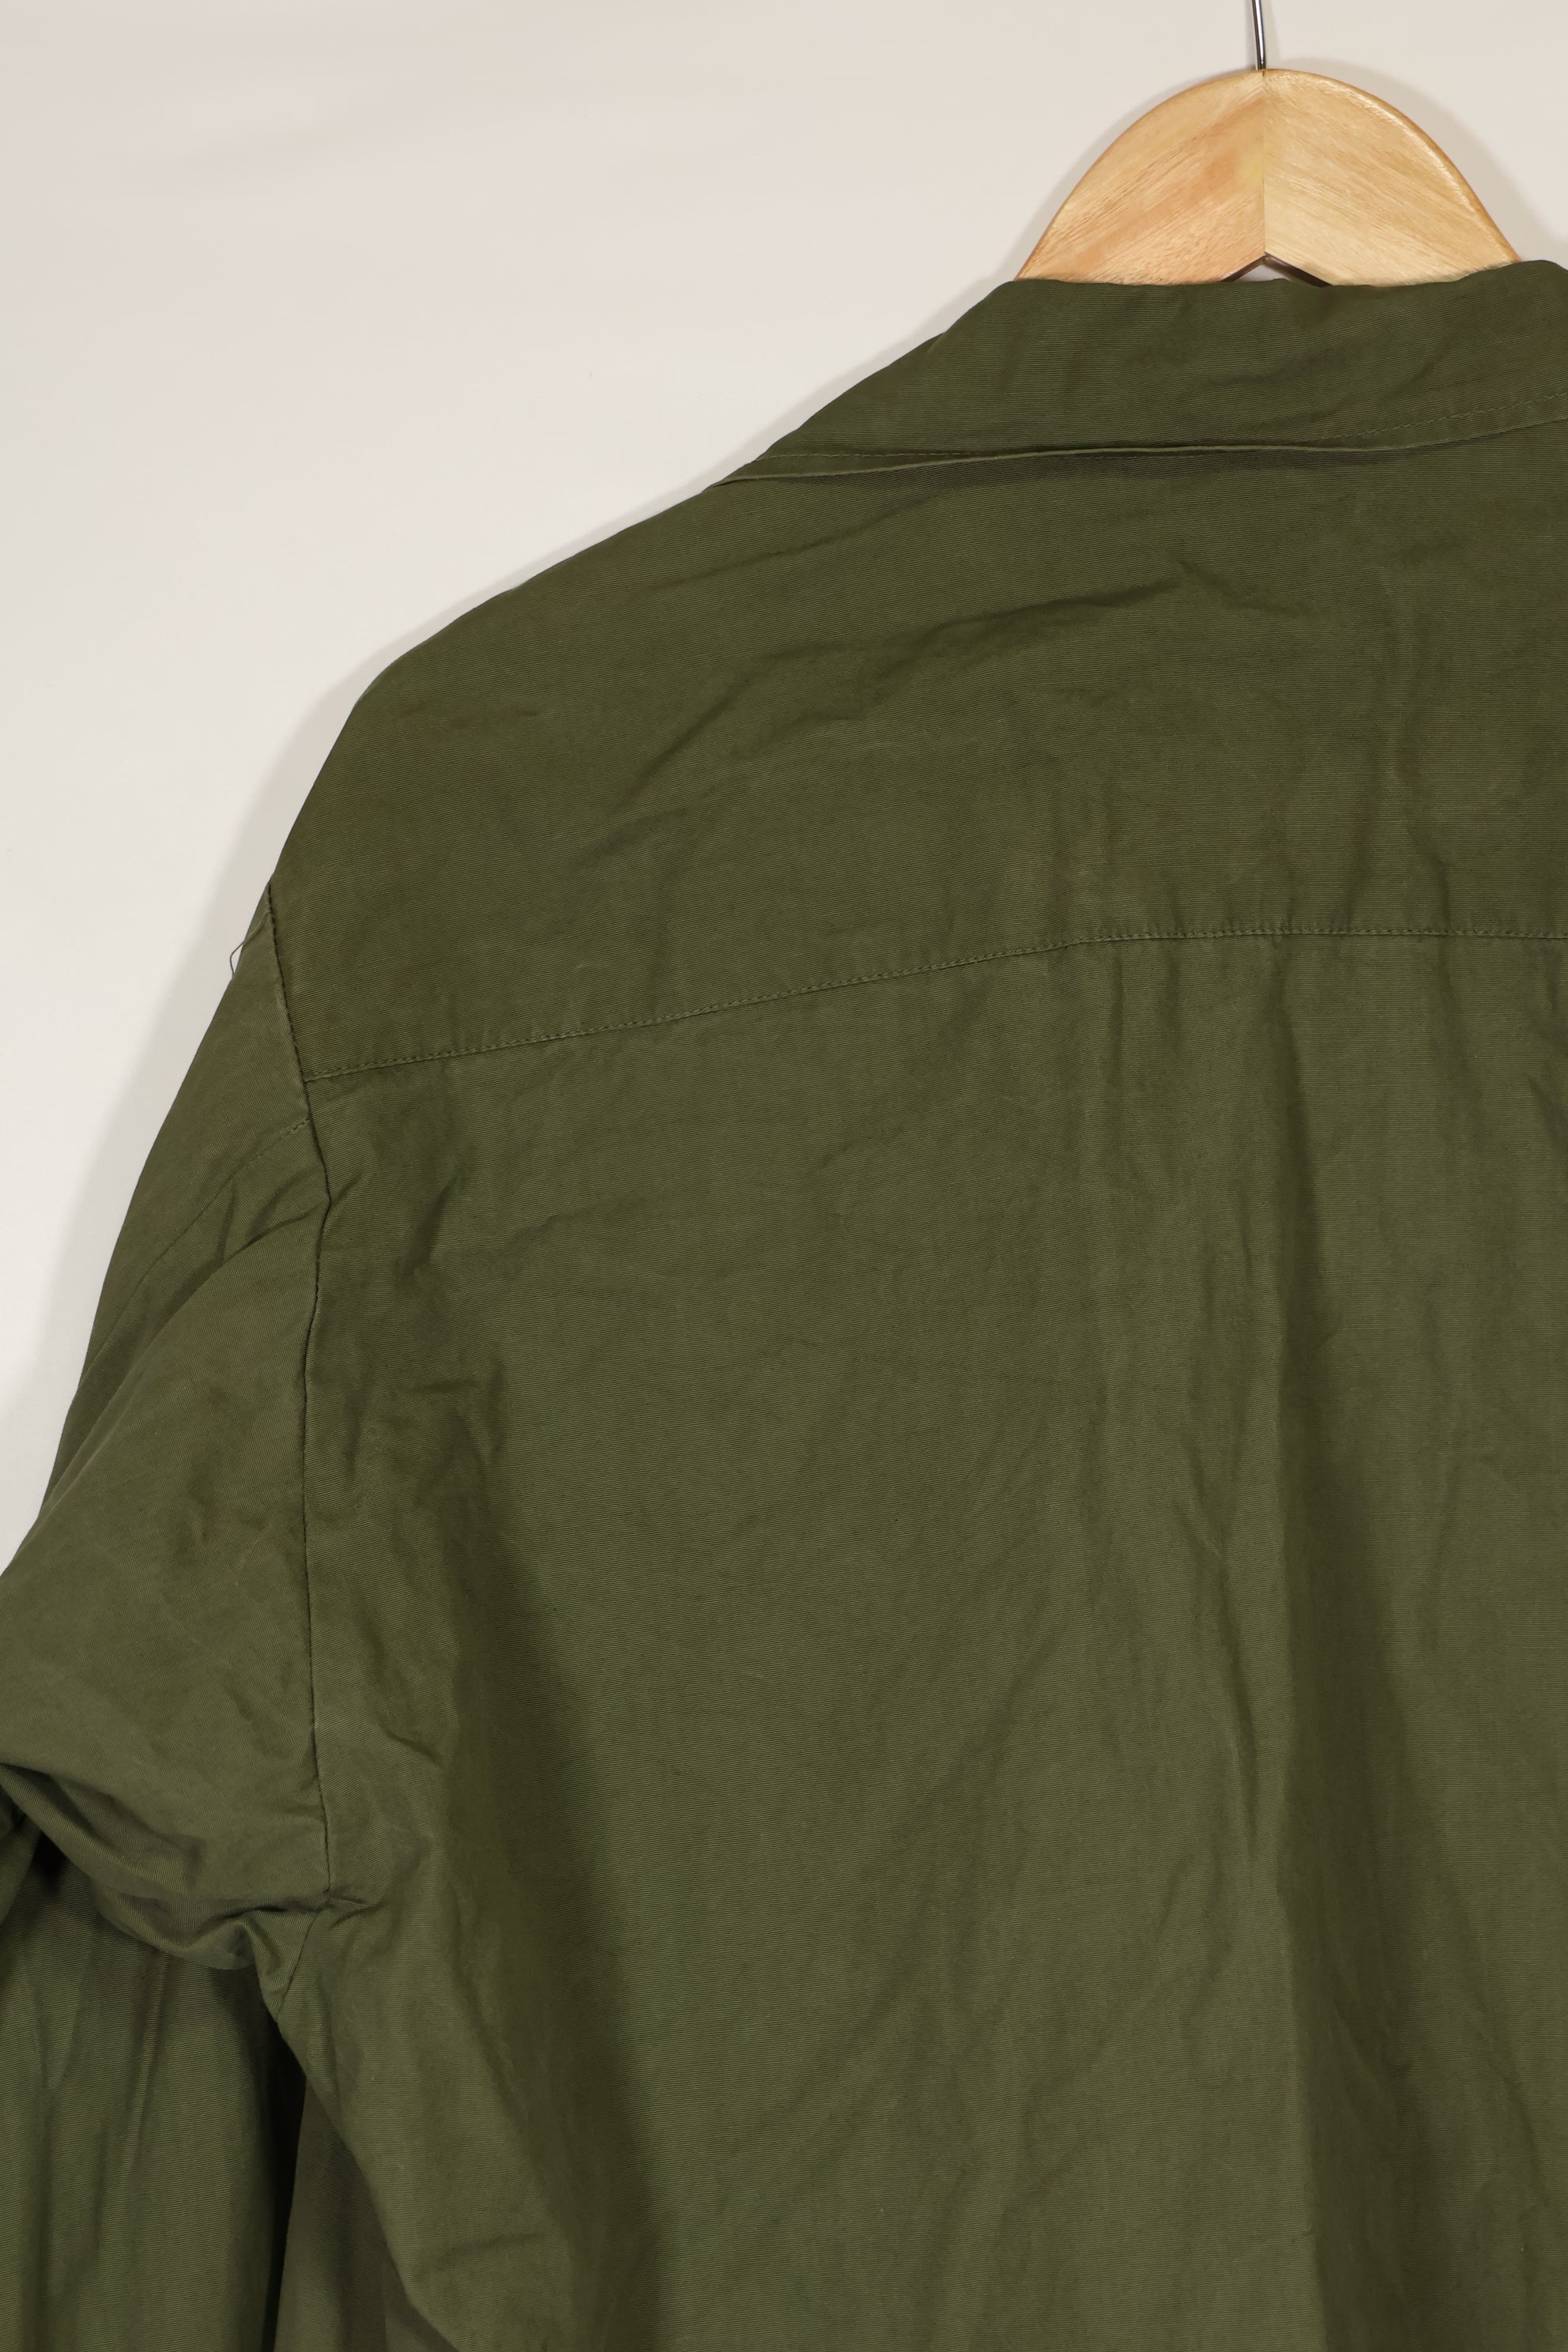 Real 1966-1967 3rd Model Jungle Fatigue Jacket L-R with damage.